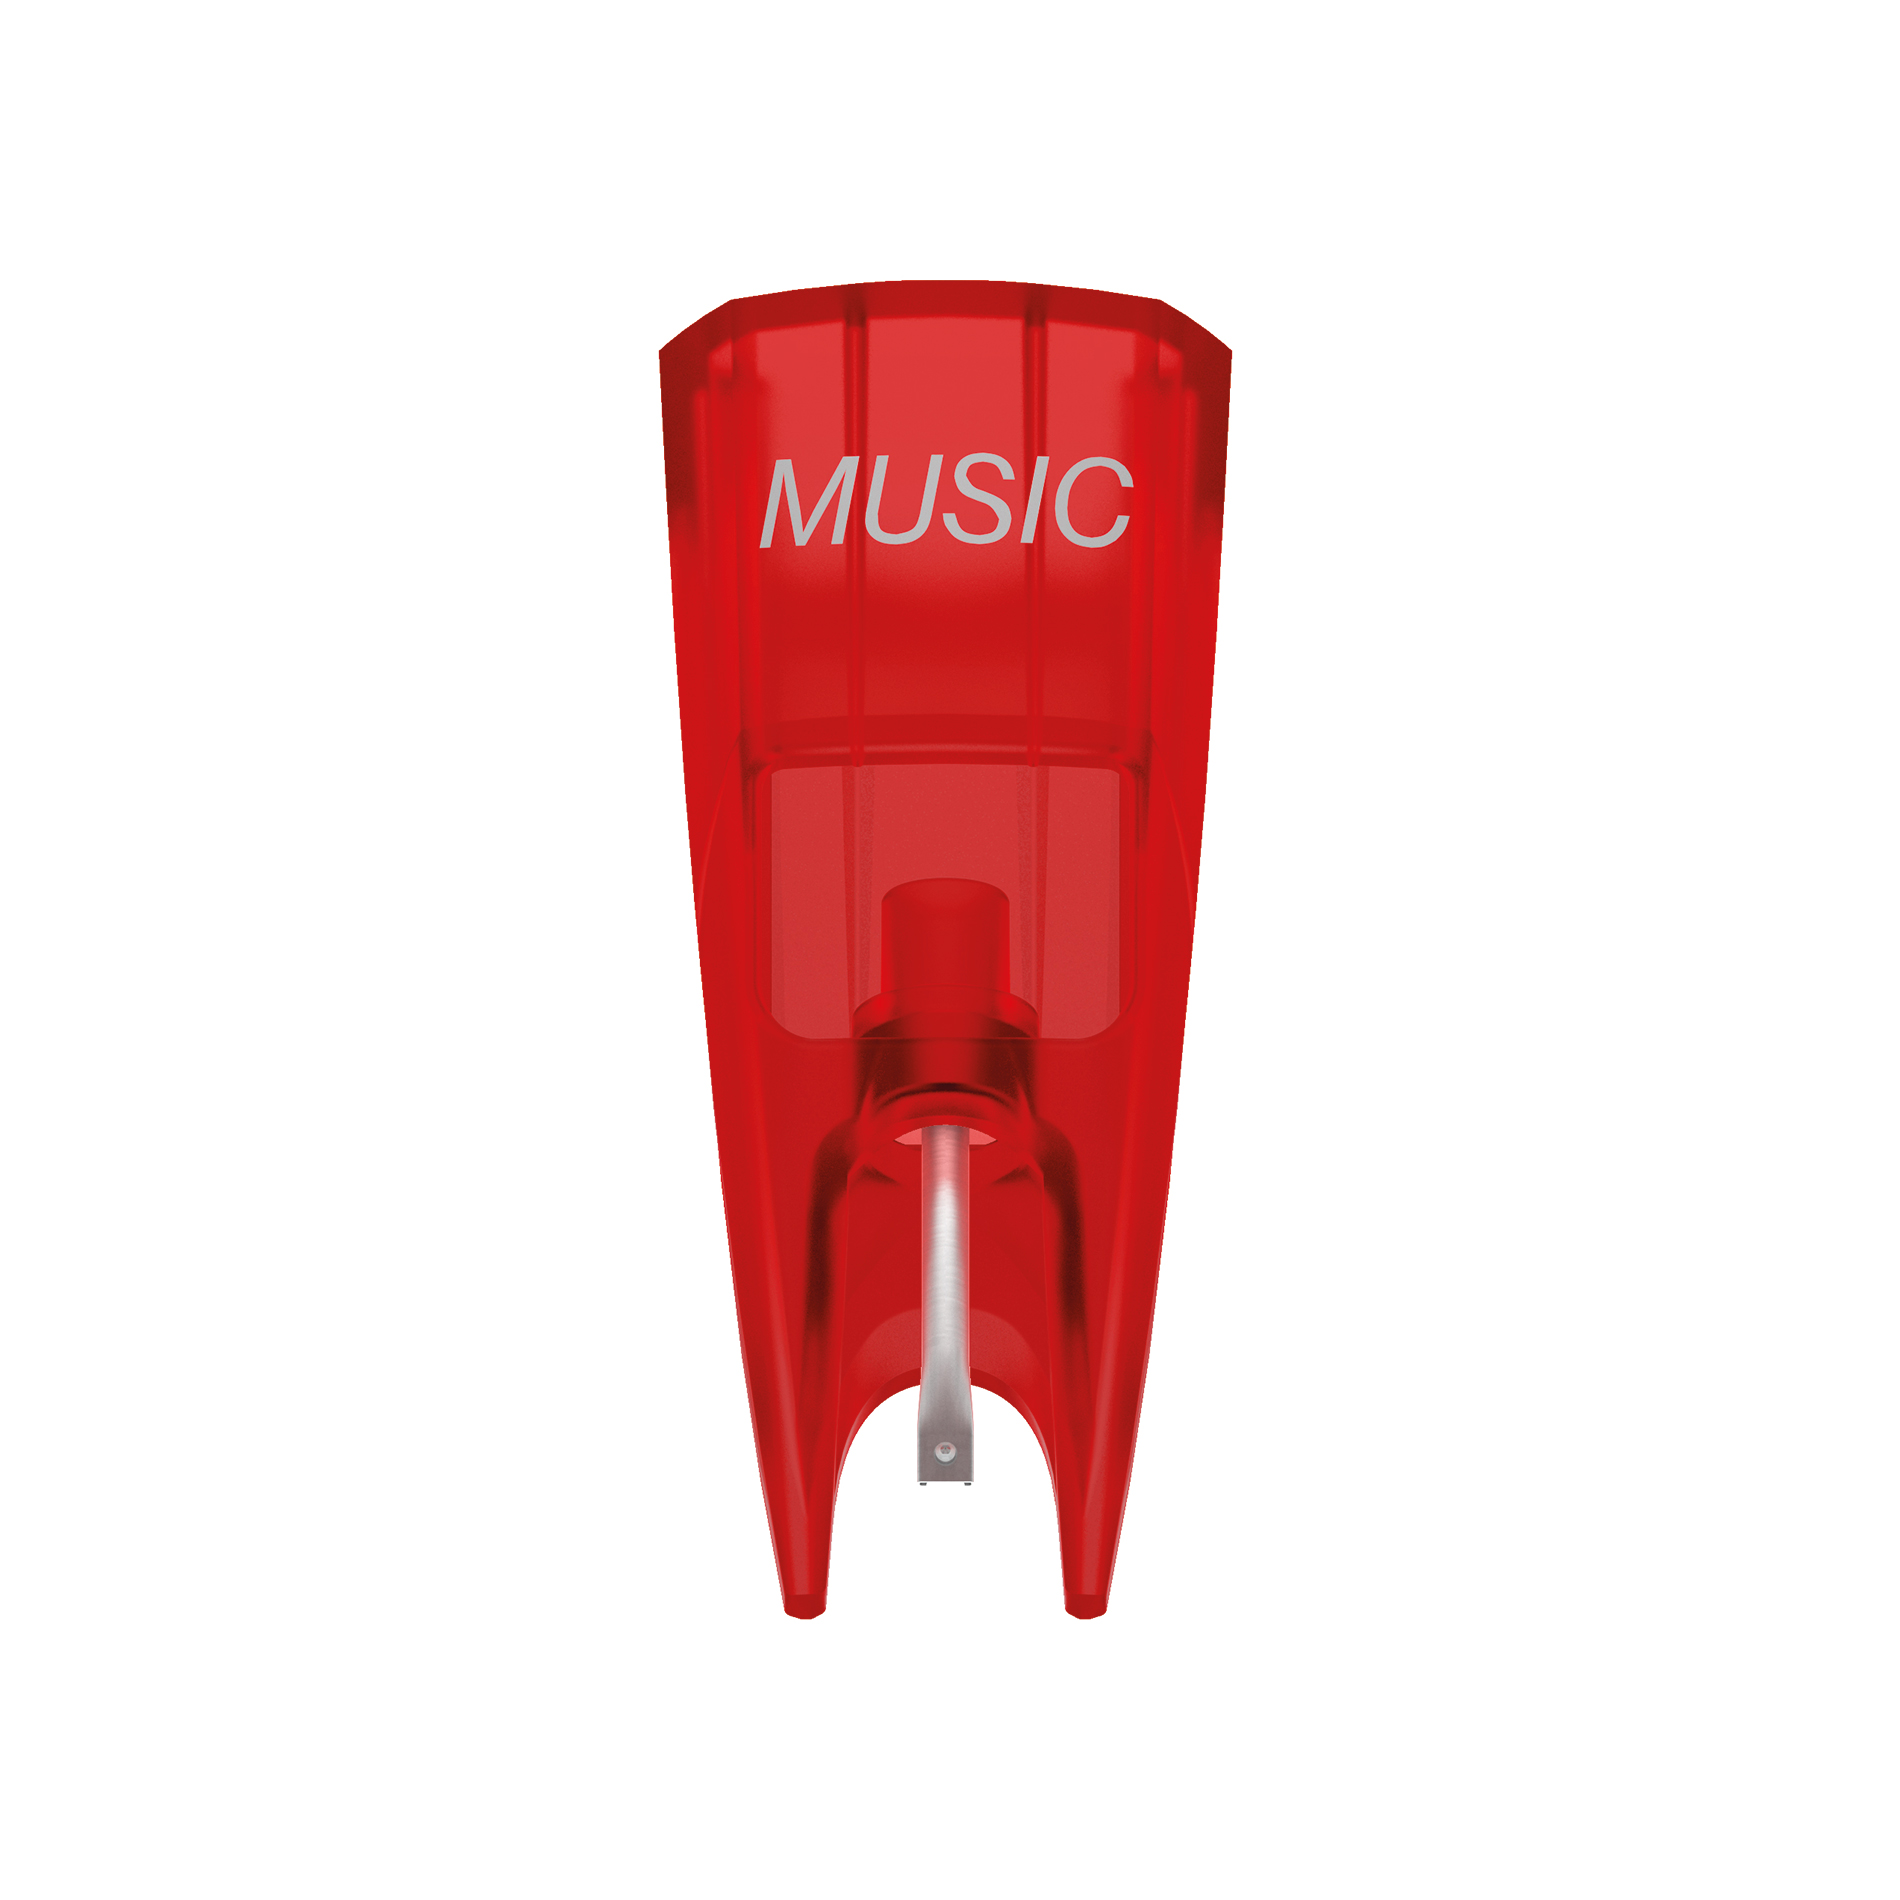 Sogetronic Stylus Concorde Music Red - Cellule Platine - Variation 1